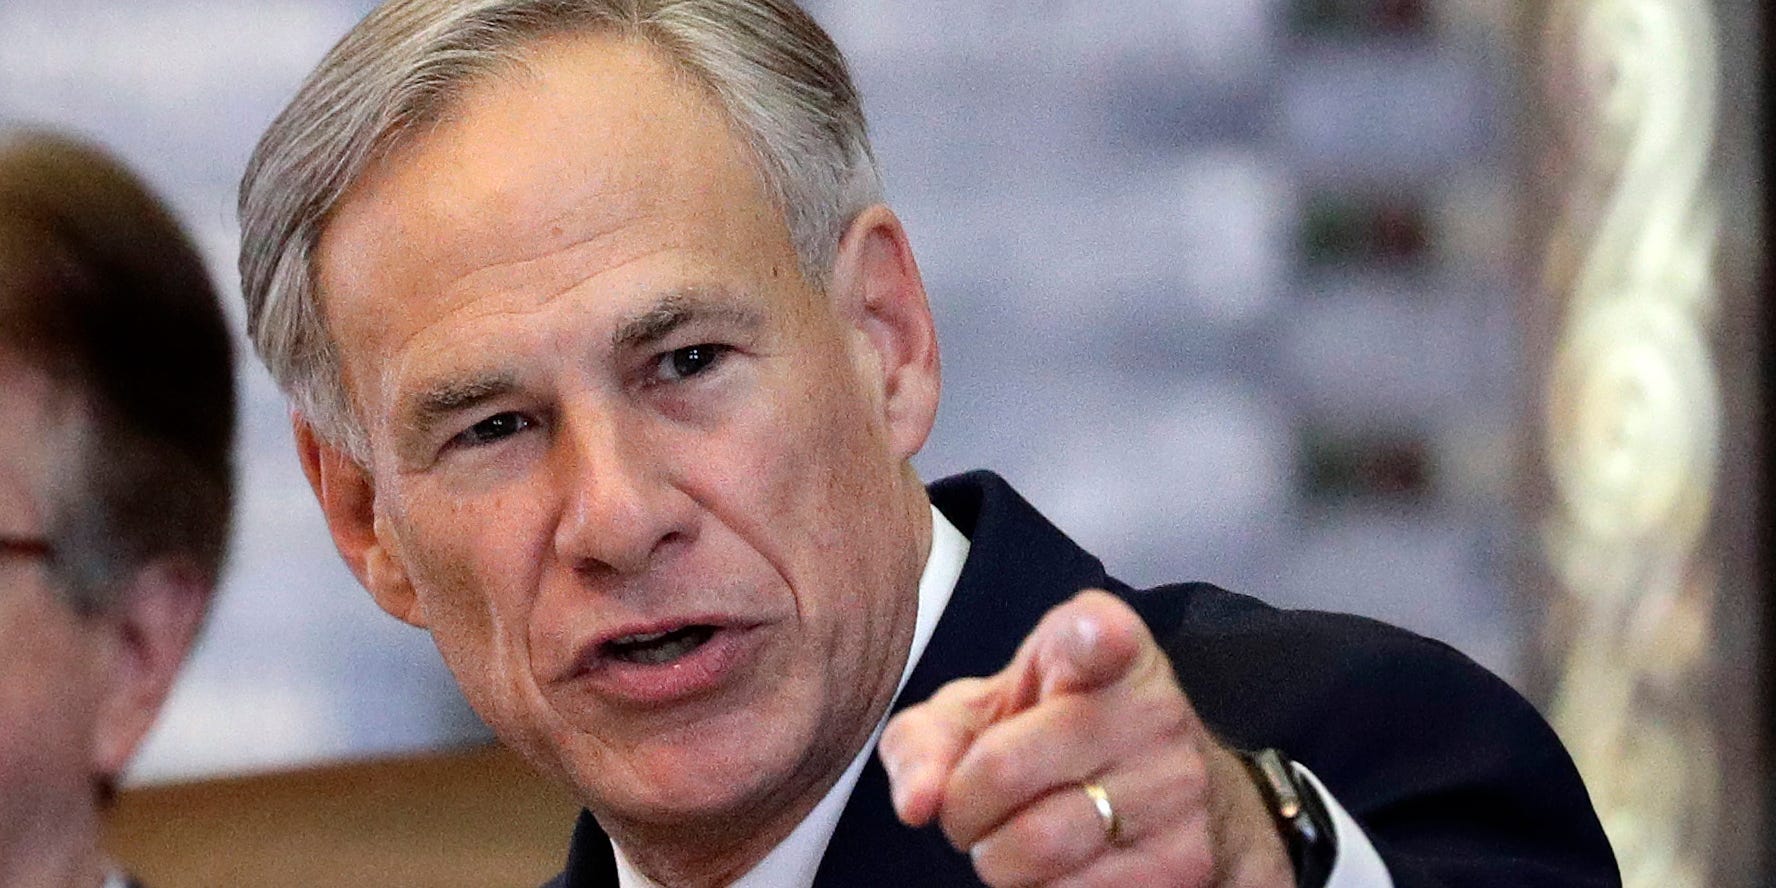 Texas Governor Greg Abbot points at the camera with a stern expression